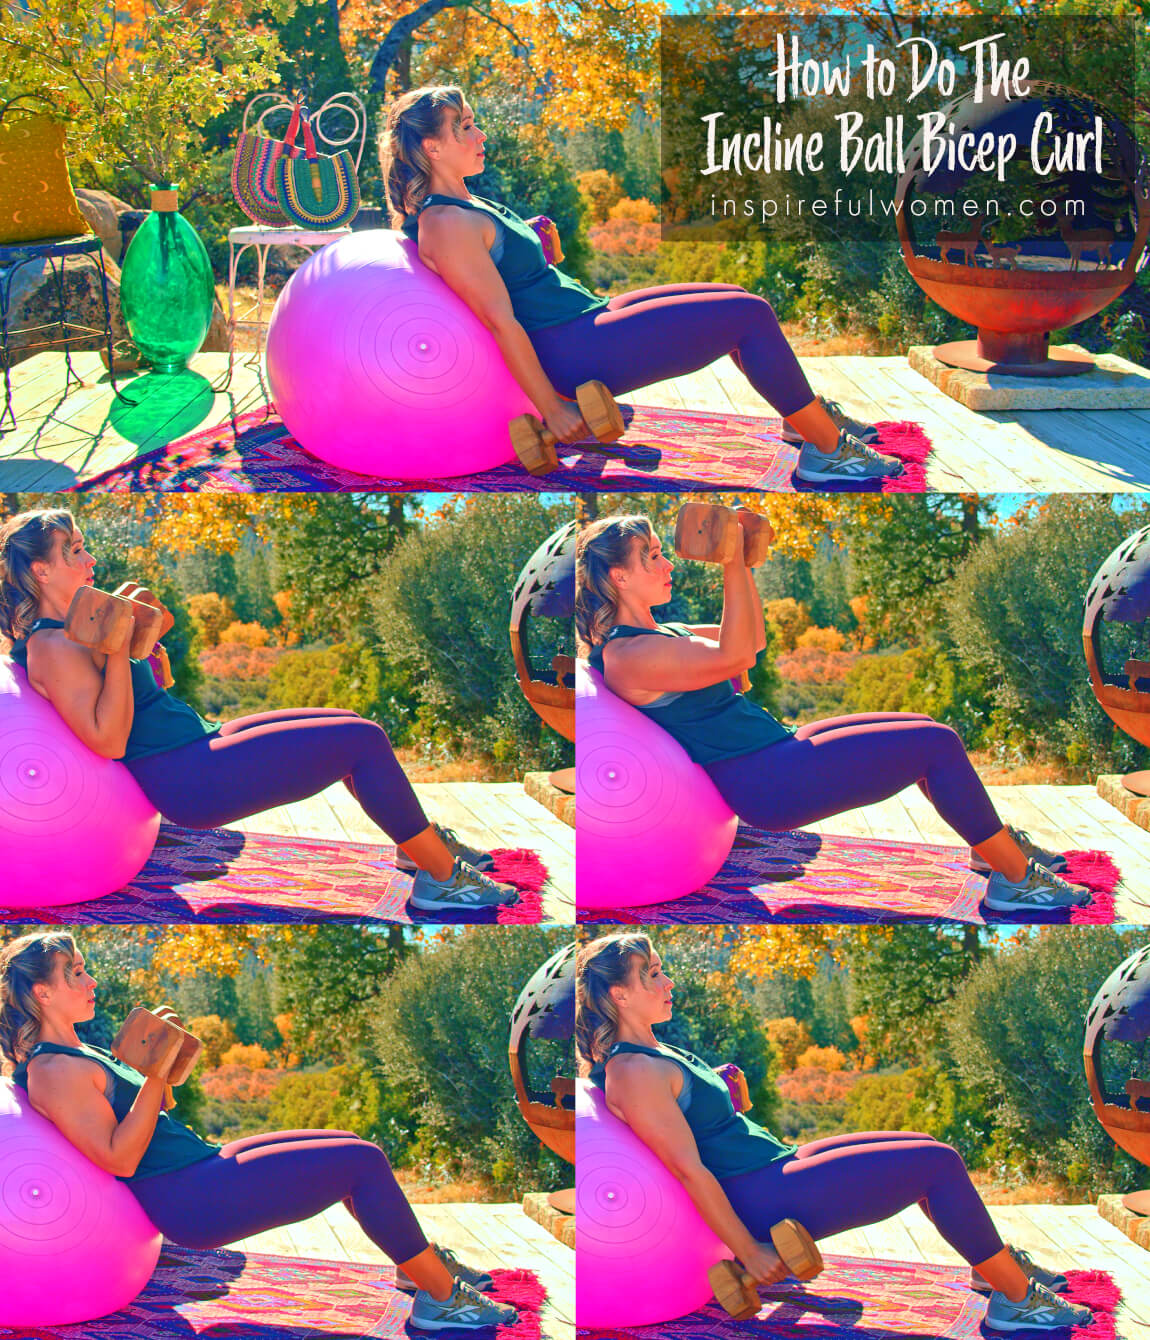 how-to-do-incline-bicep-curl-dumbbell-stability-ball-upper-arm-strengthening-exercise-at-home-proper-form